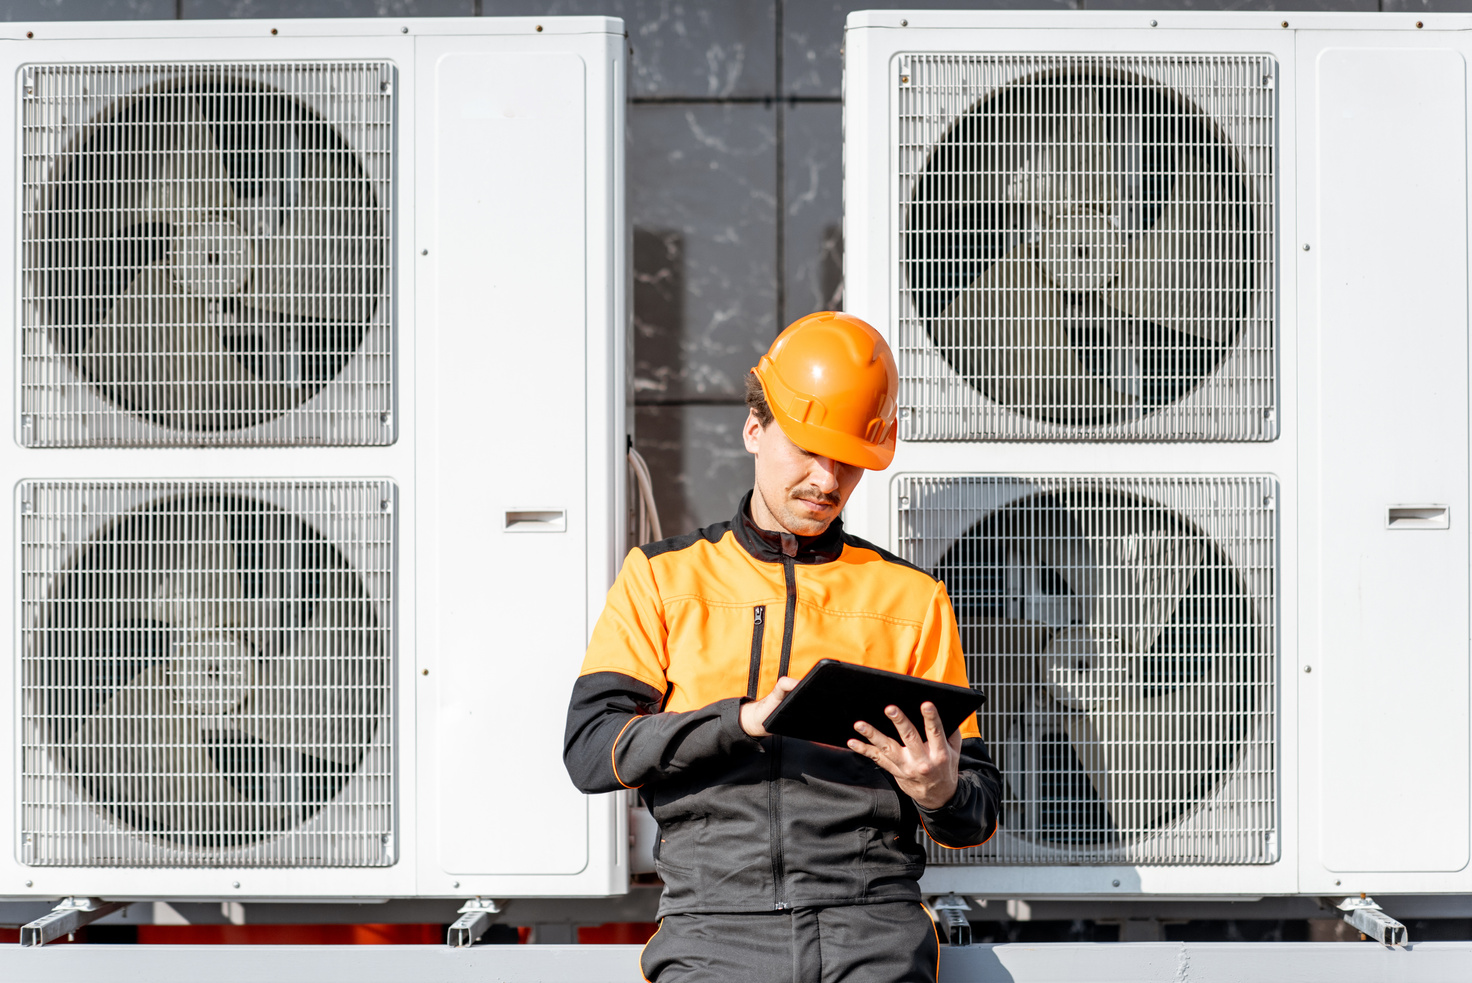 Workman Servicing Air Conditioning or Heat Pump with Digital Tablet